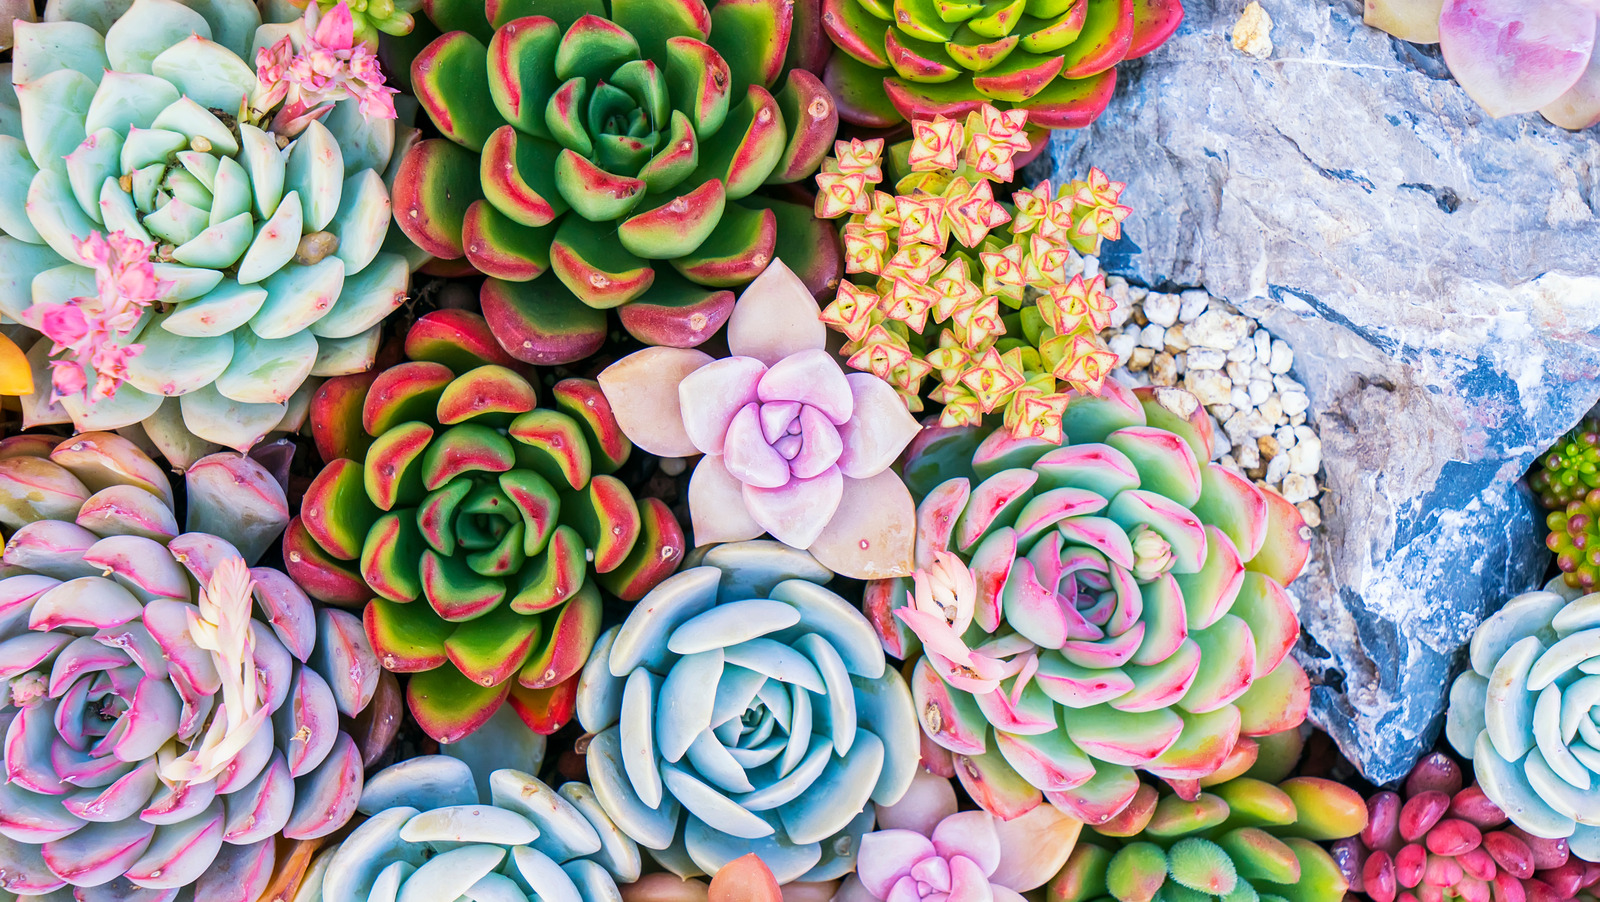 15440 Succulent Wallpaper Stock Photos  Free  RoyaltyFree Stock Photos  from Dreamstime